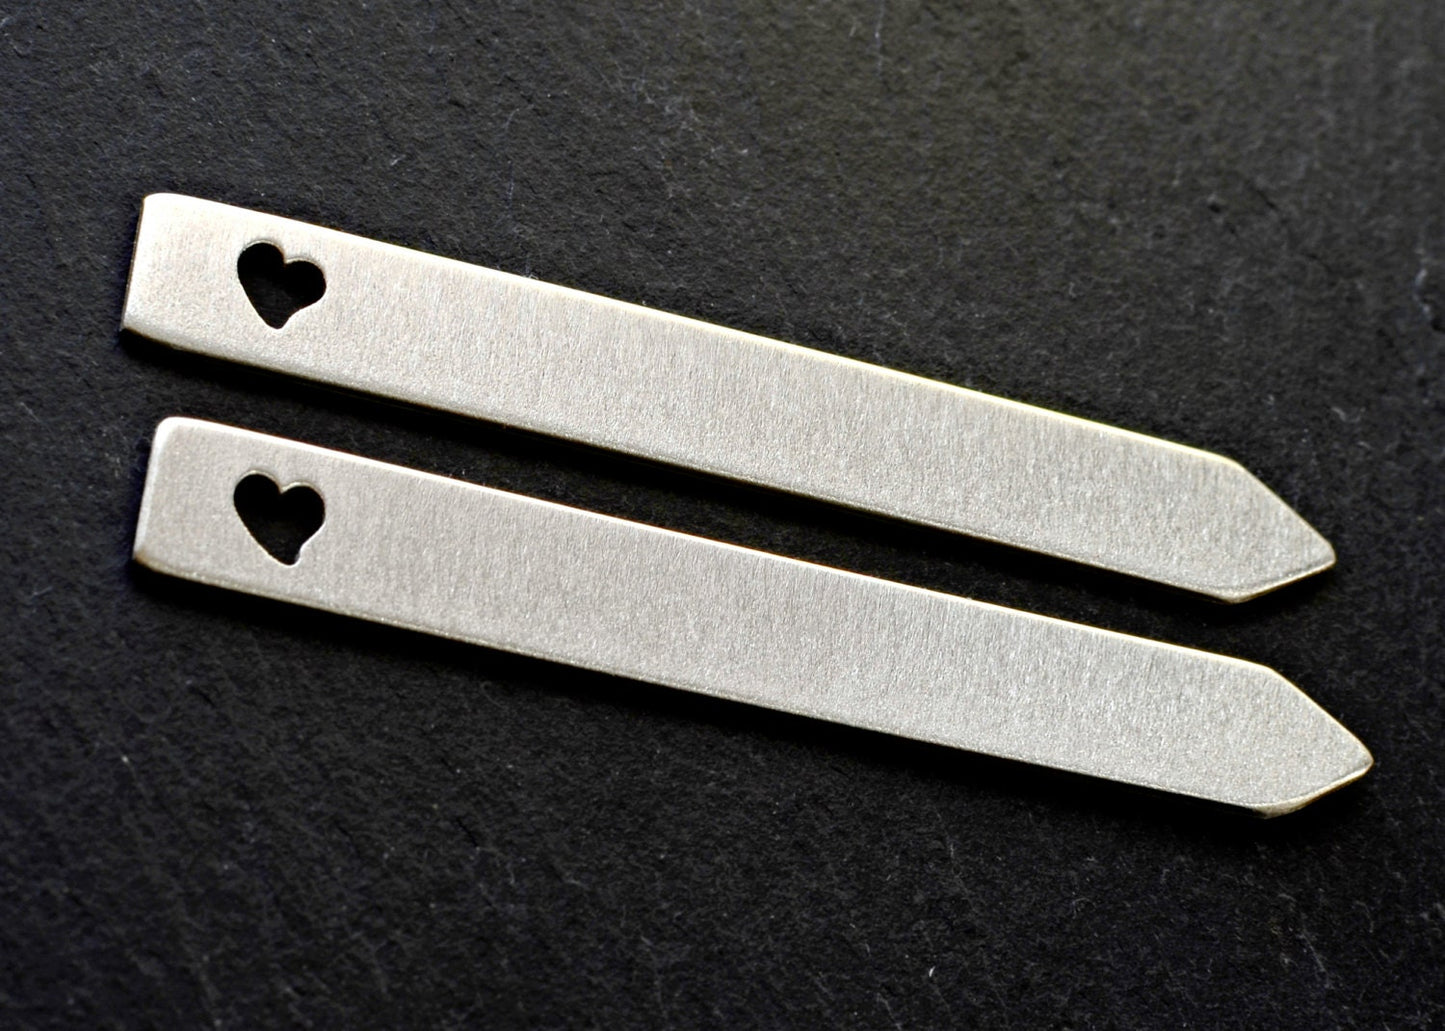 Heart cutouts in sterling silver collar stays with space for you to personalize